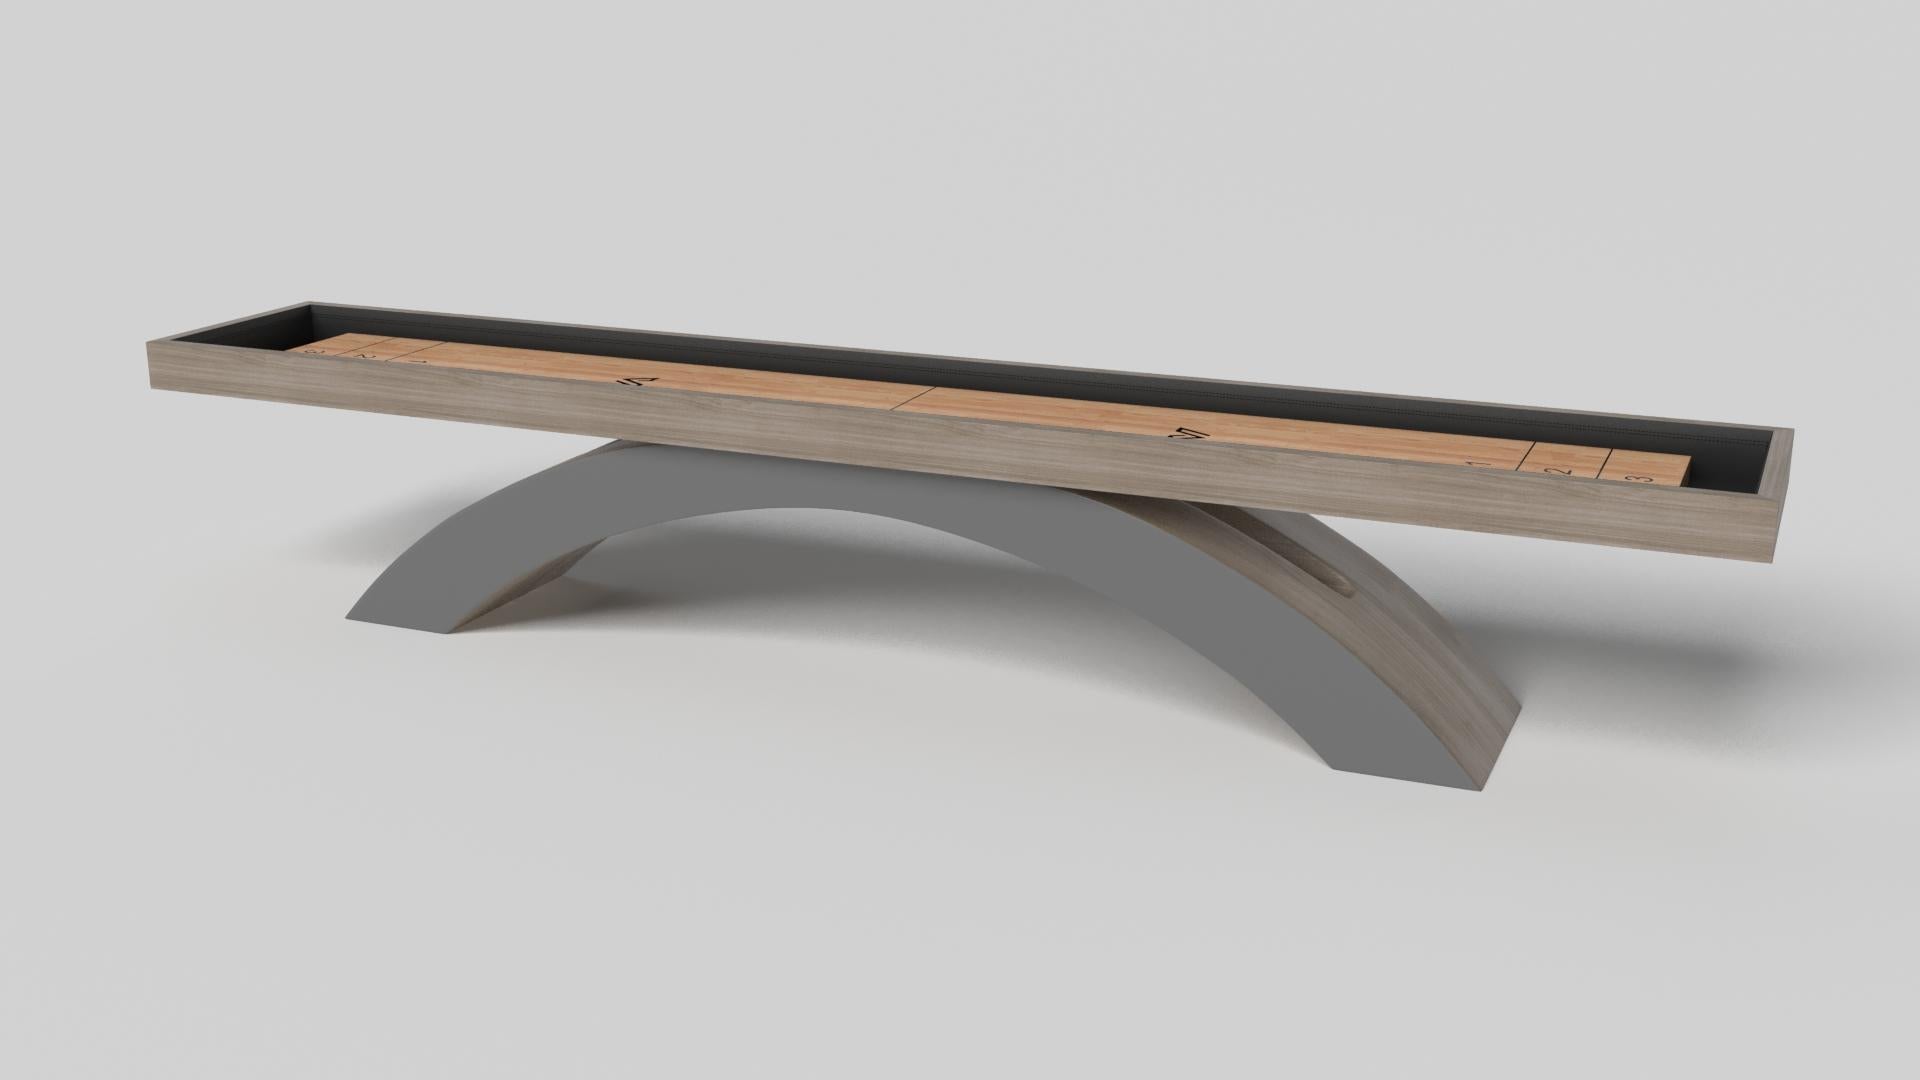 An open, arched base balances beautifully against the hard edges of the rectangular surface top, making the Zenith shuffleboard table in black with red a striking juxtaposition of modern, geometric forms. Minimalist in its appeal yet luxurious in